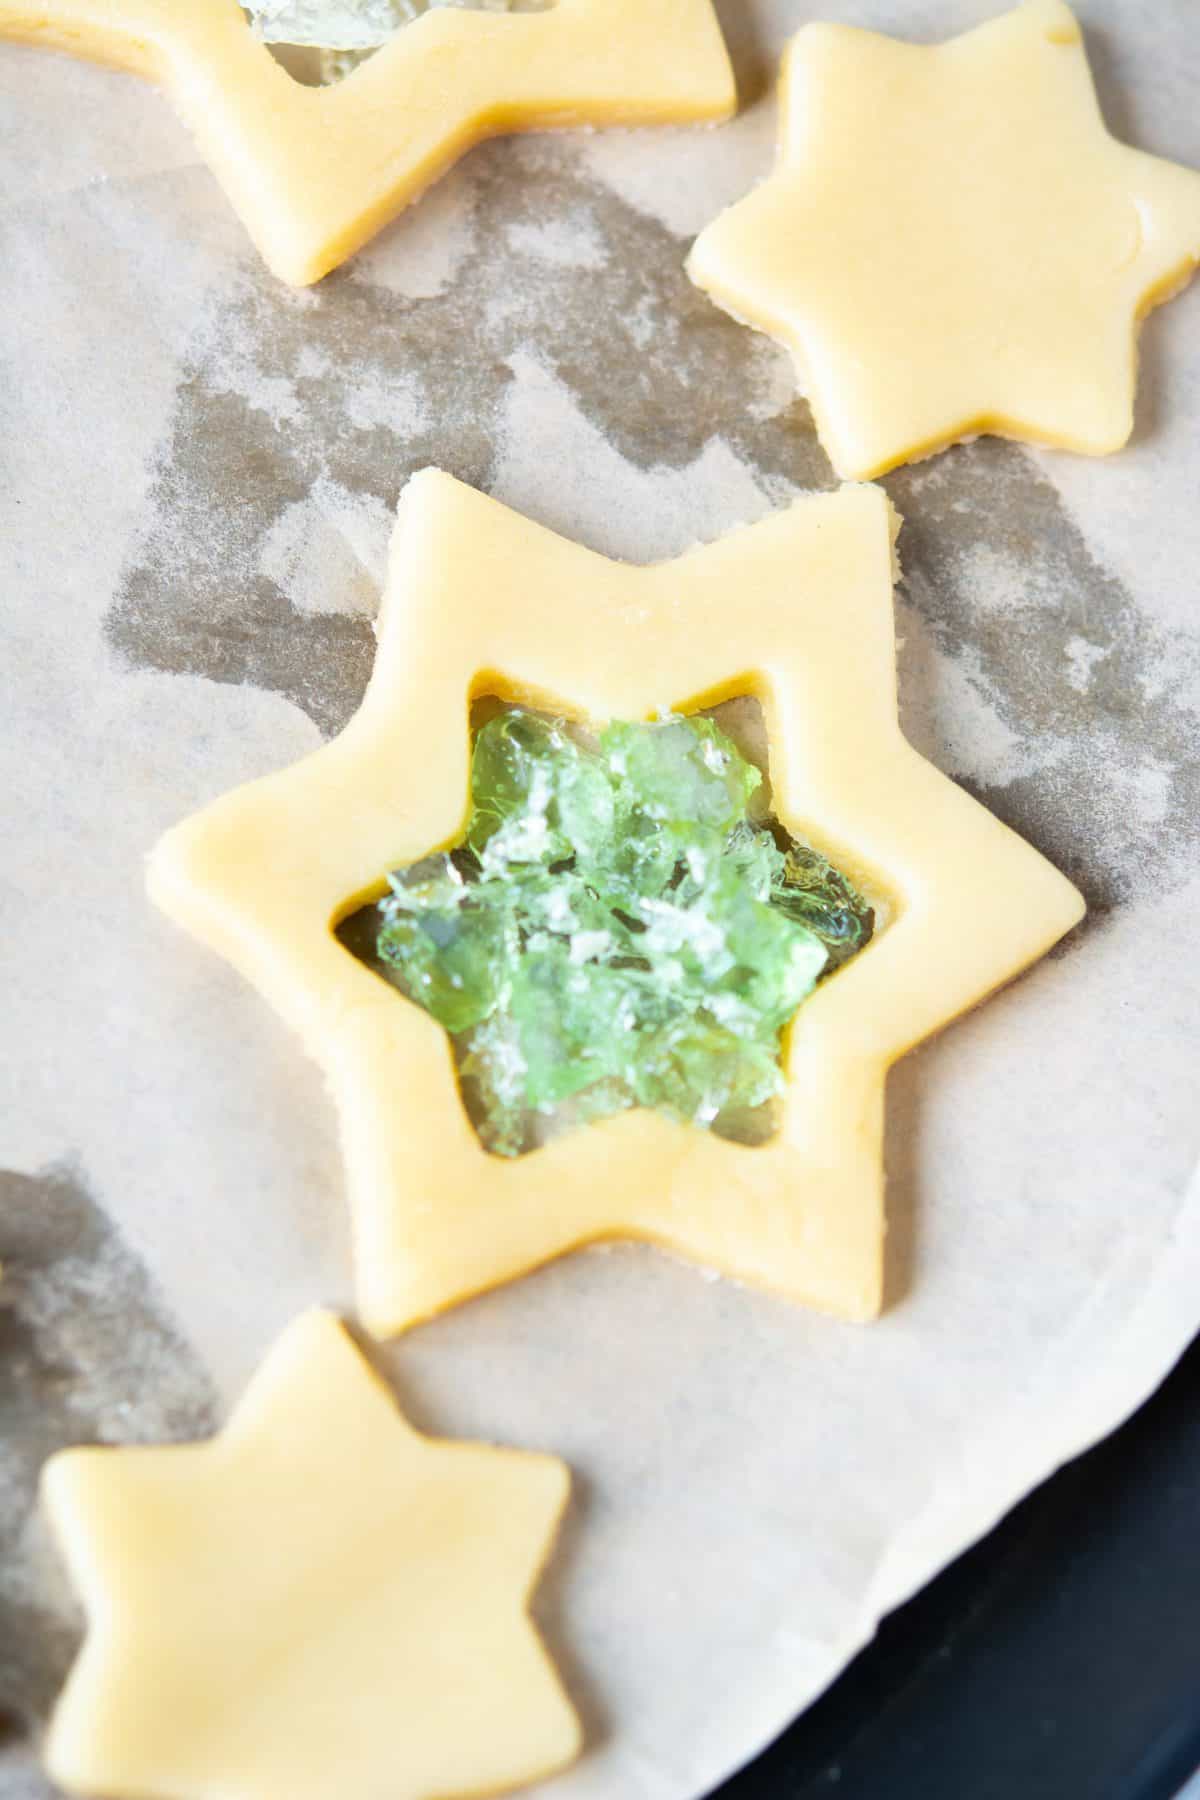 adding the crushed candies to the star cookies